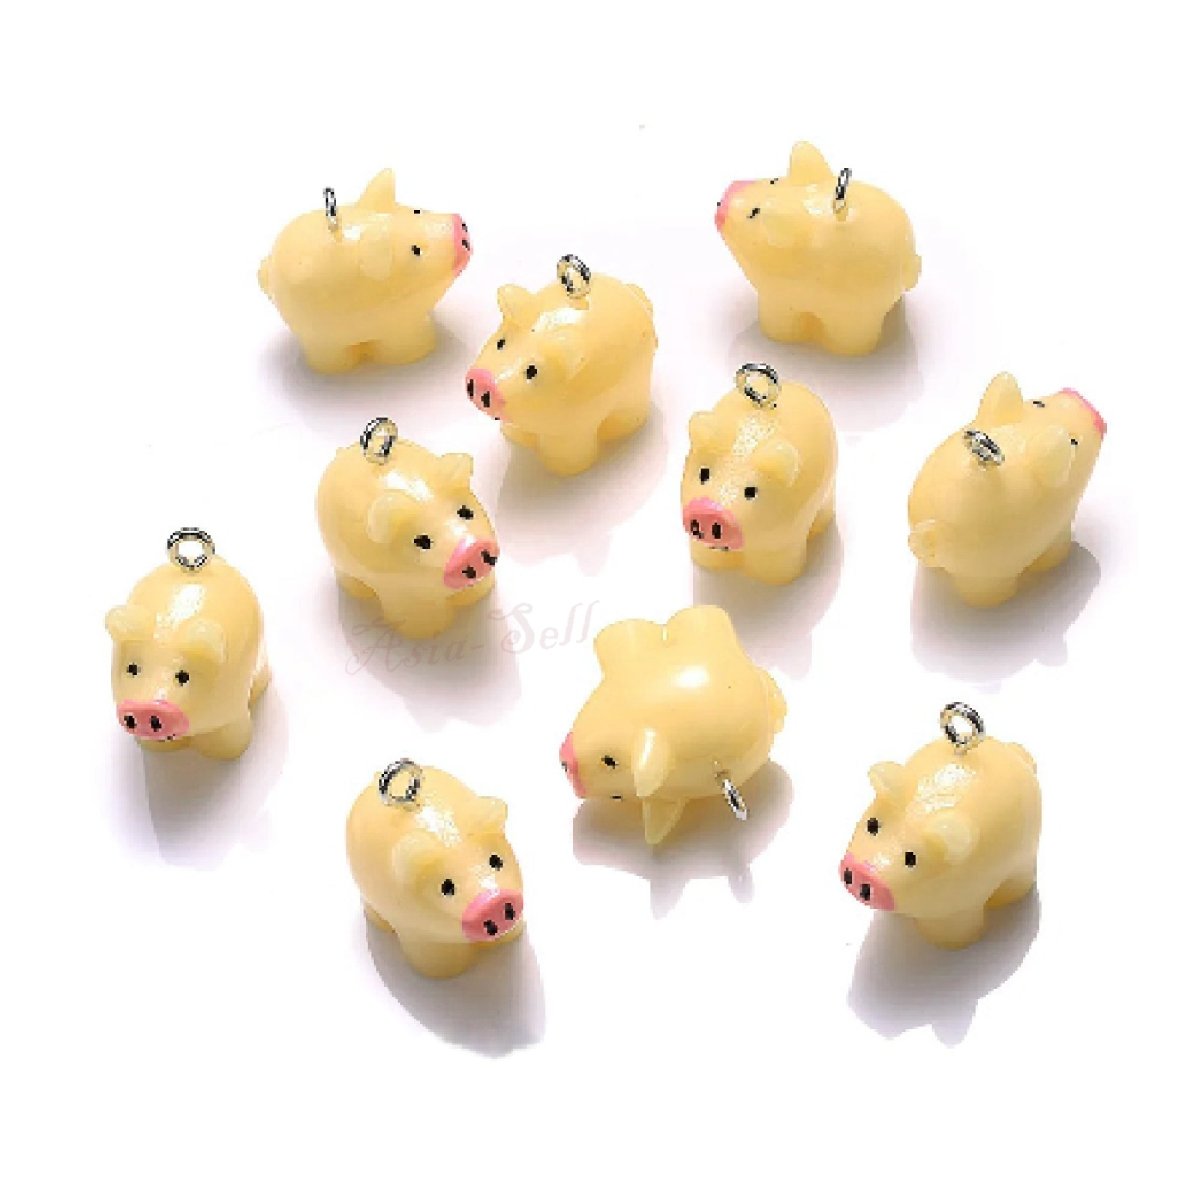 10pcs Miniature Mini Garden Animal Figurines Charms with Loop Pendant Craft - Pigs - Asia Sell